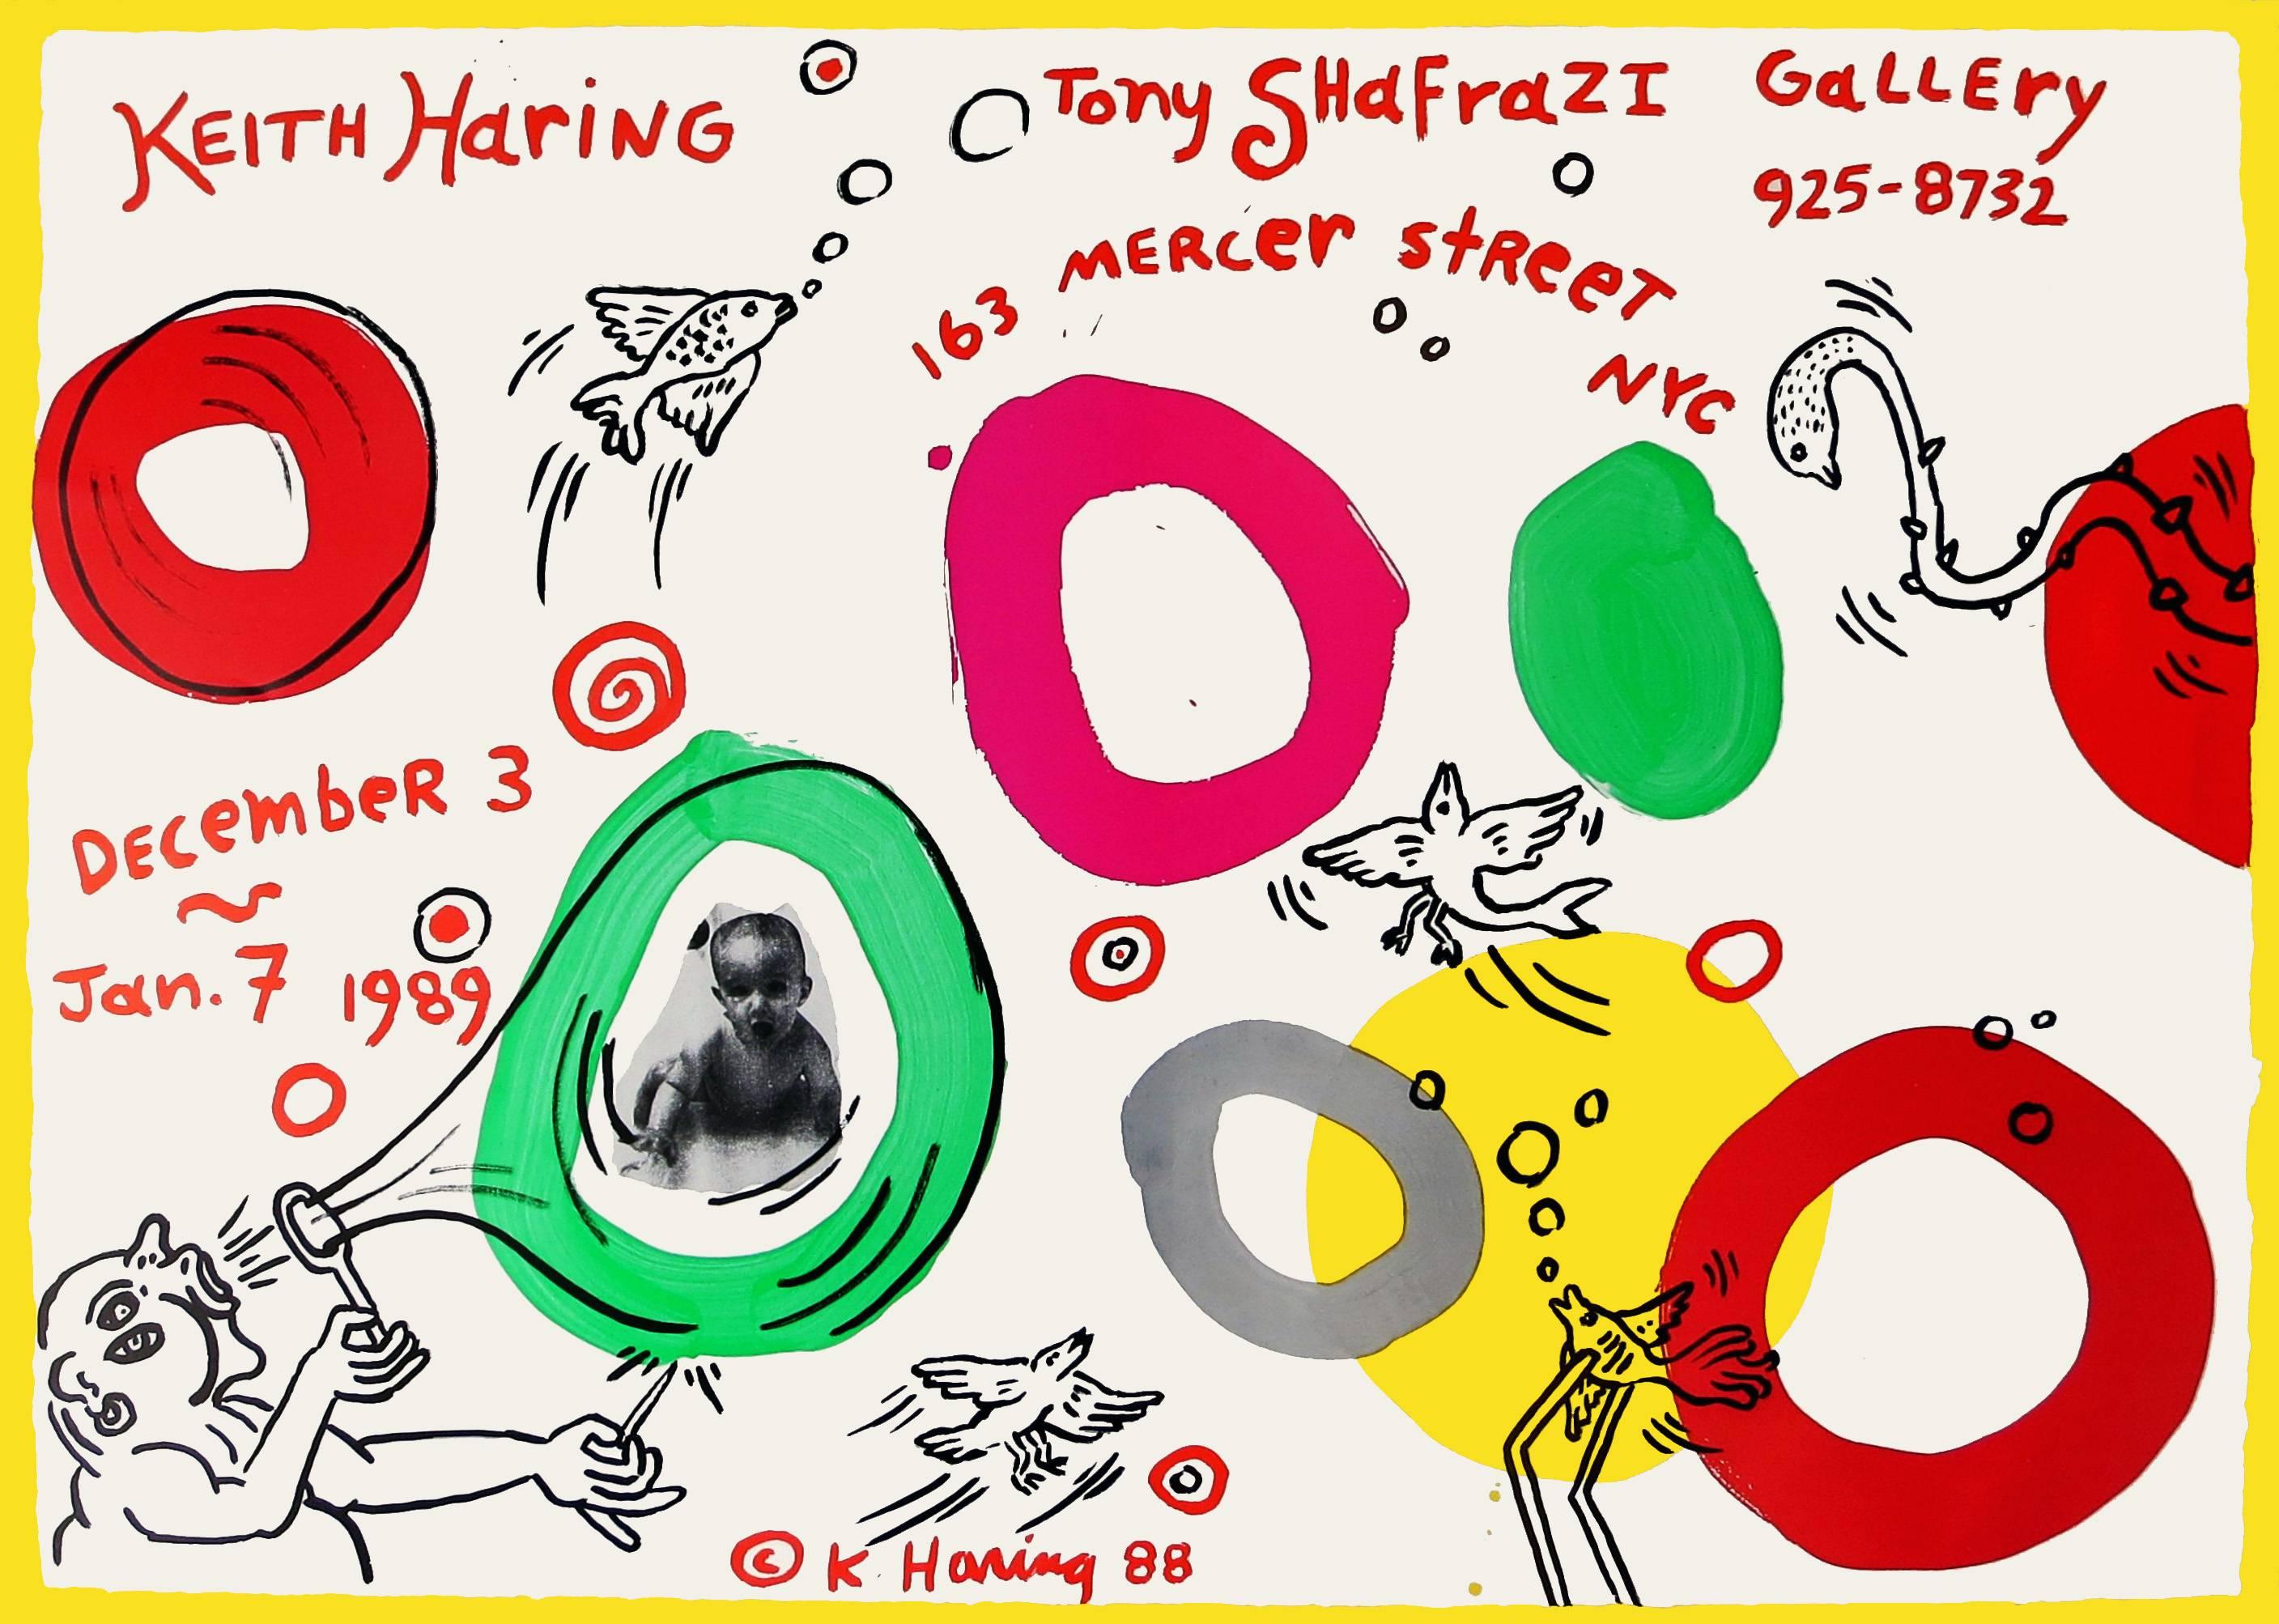 Rare exhibition poster for Keith Haring's show at Tony Shafrazi Gallery, New York, December 3rd 1988 - January 7th 1989. The composition includes a unique, one of a kind printed photo-collage of the artist as a baby, in a bubble about to burst